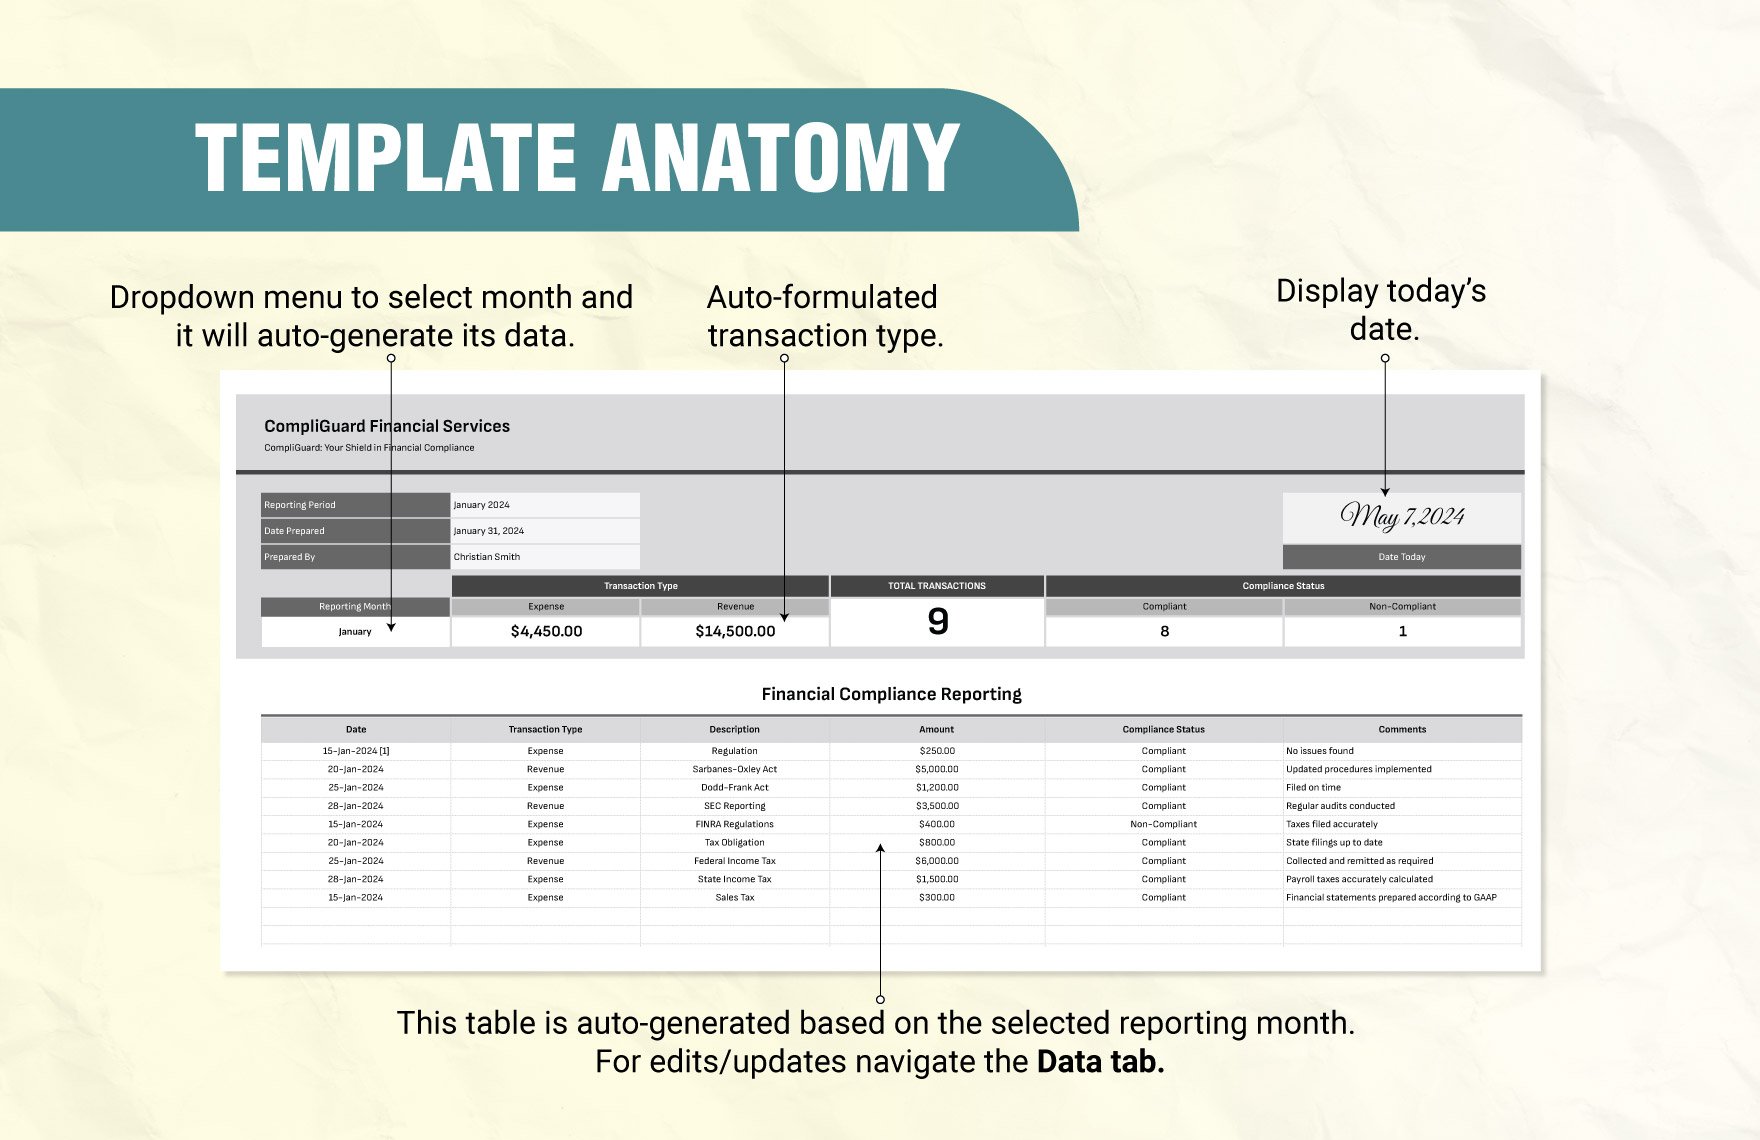 Financial Compliance Reporting Template